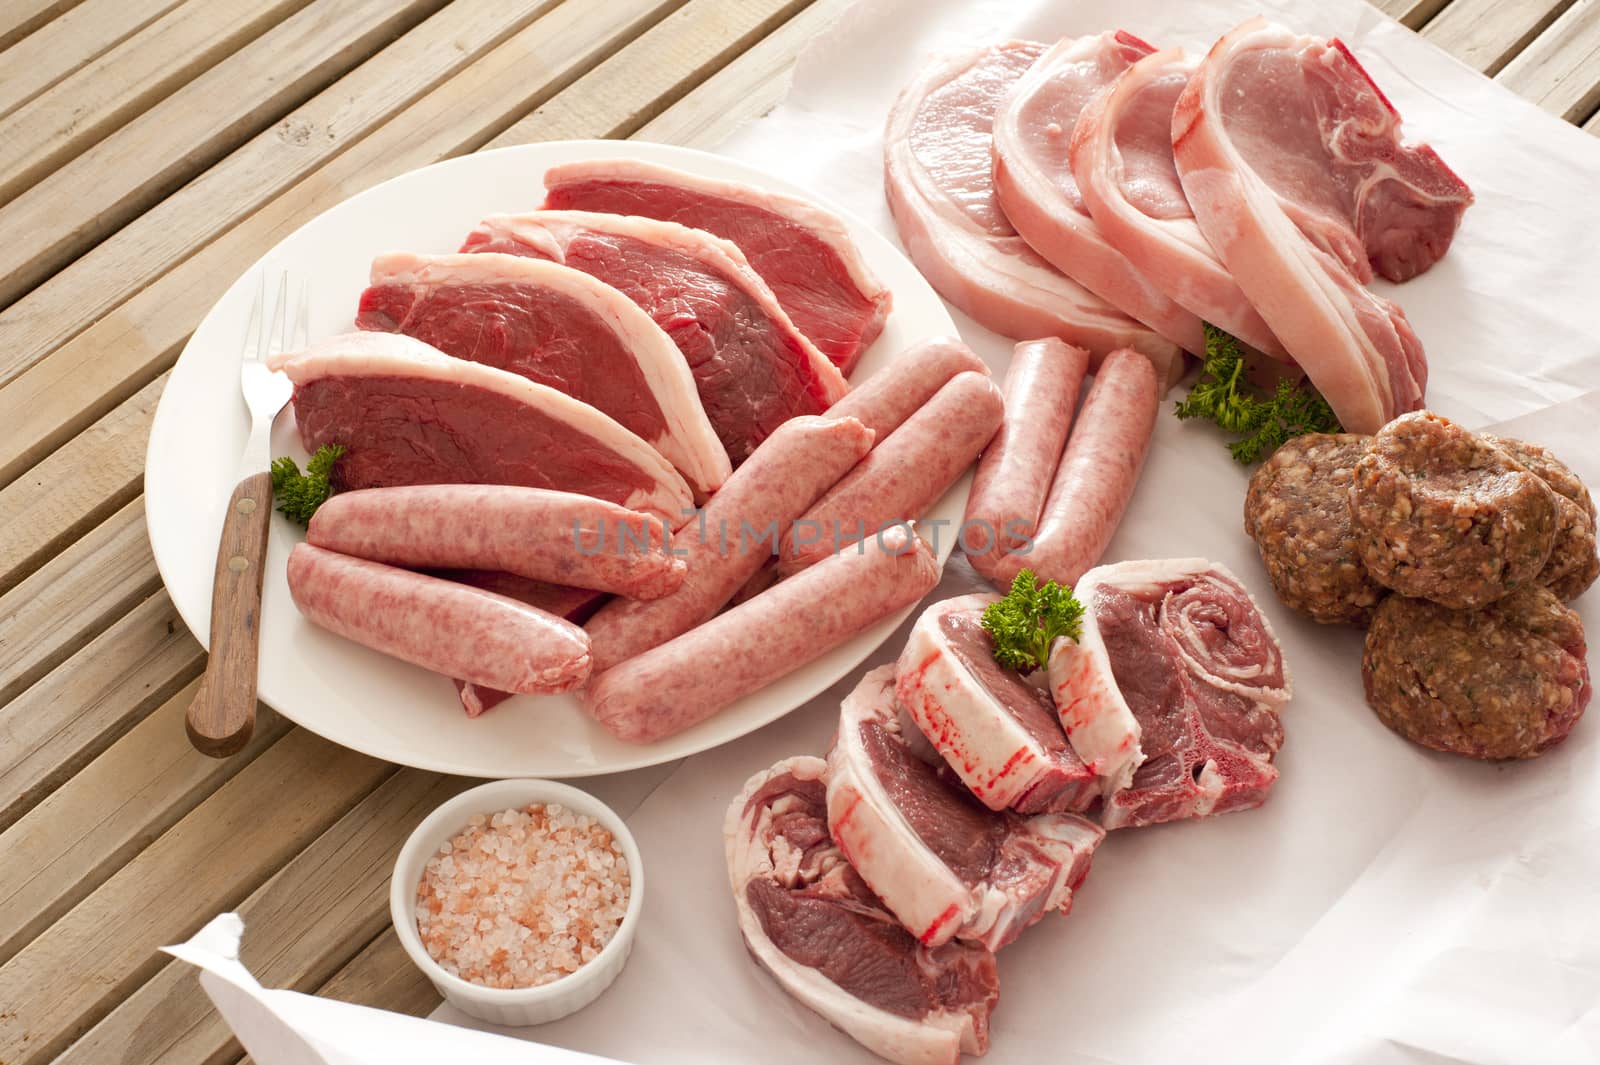 Large assortment of raw meat on a table by stockarch